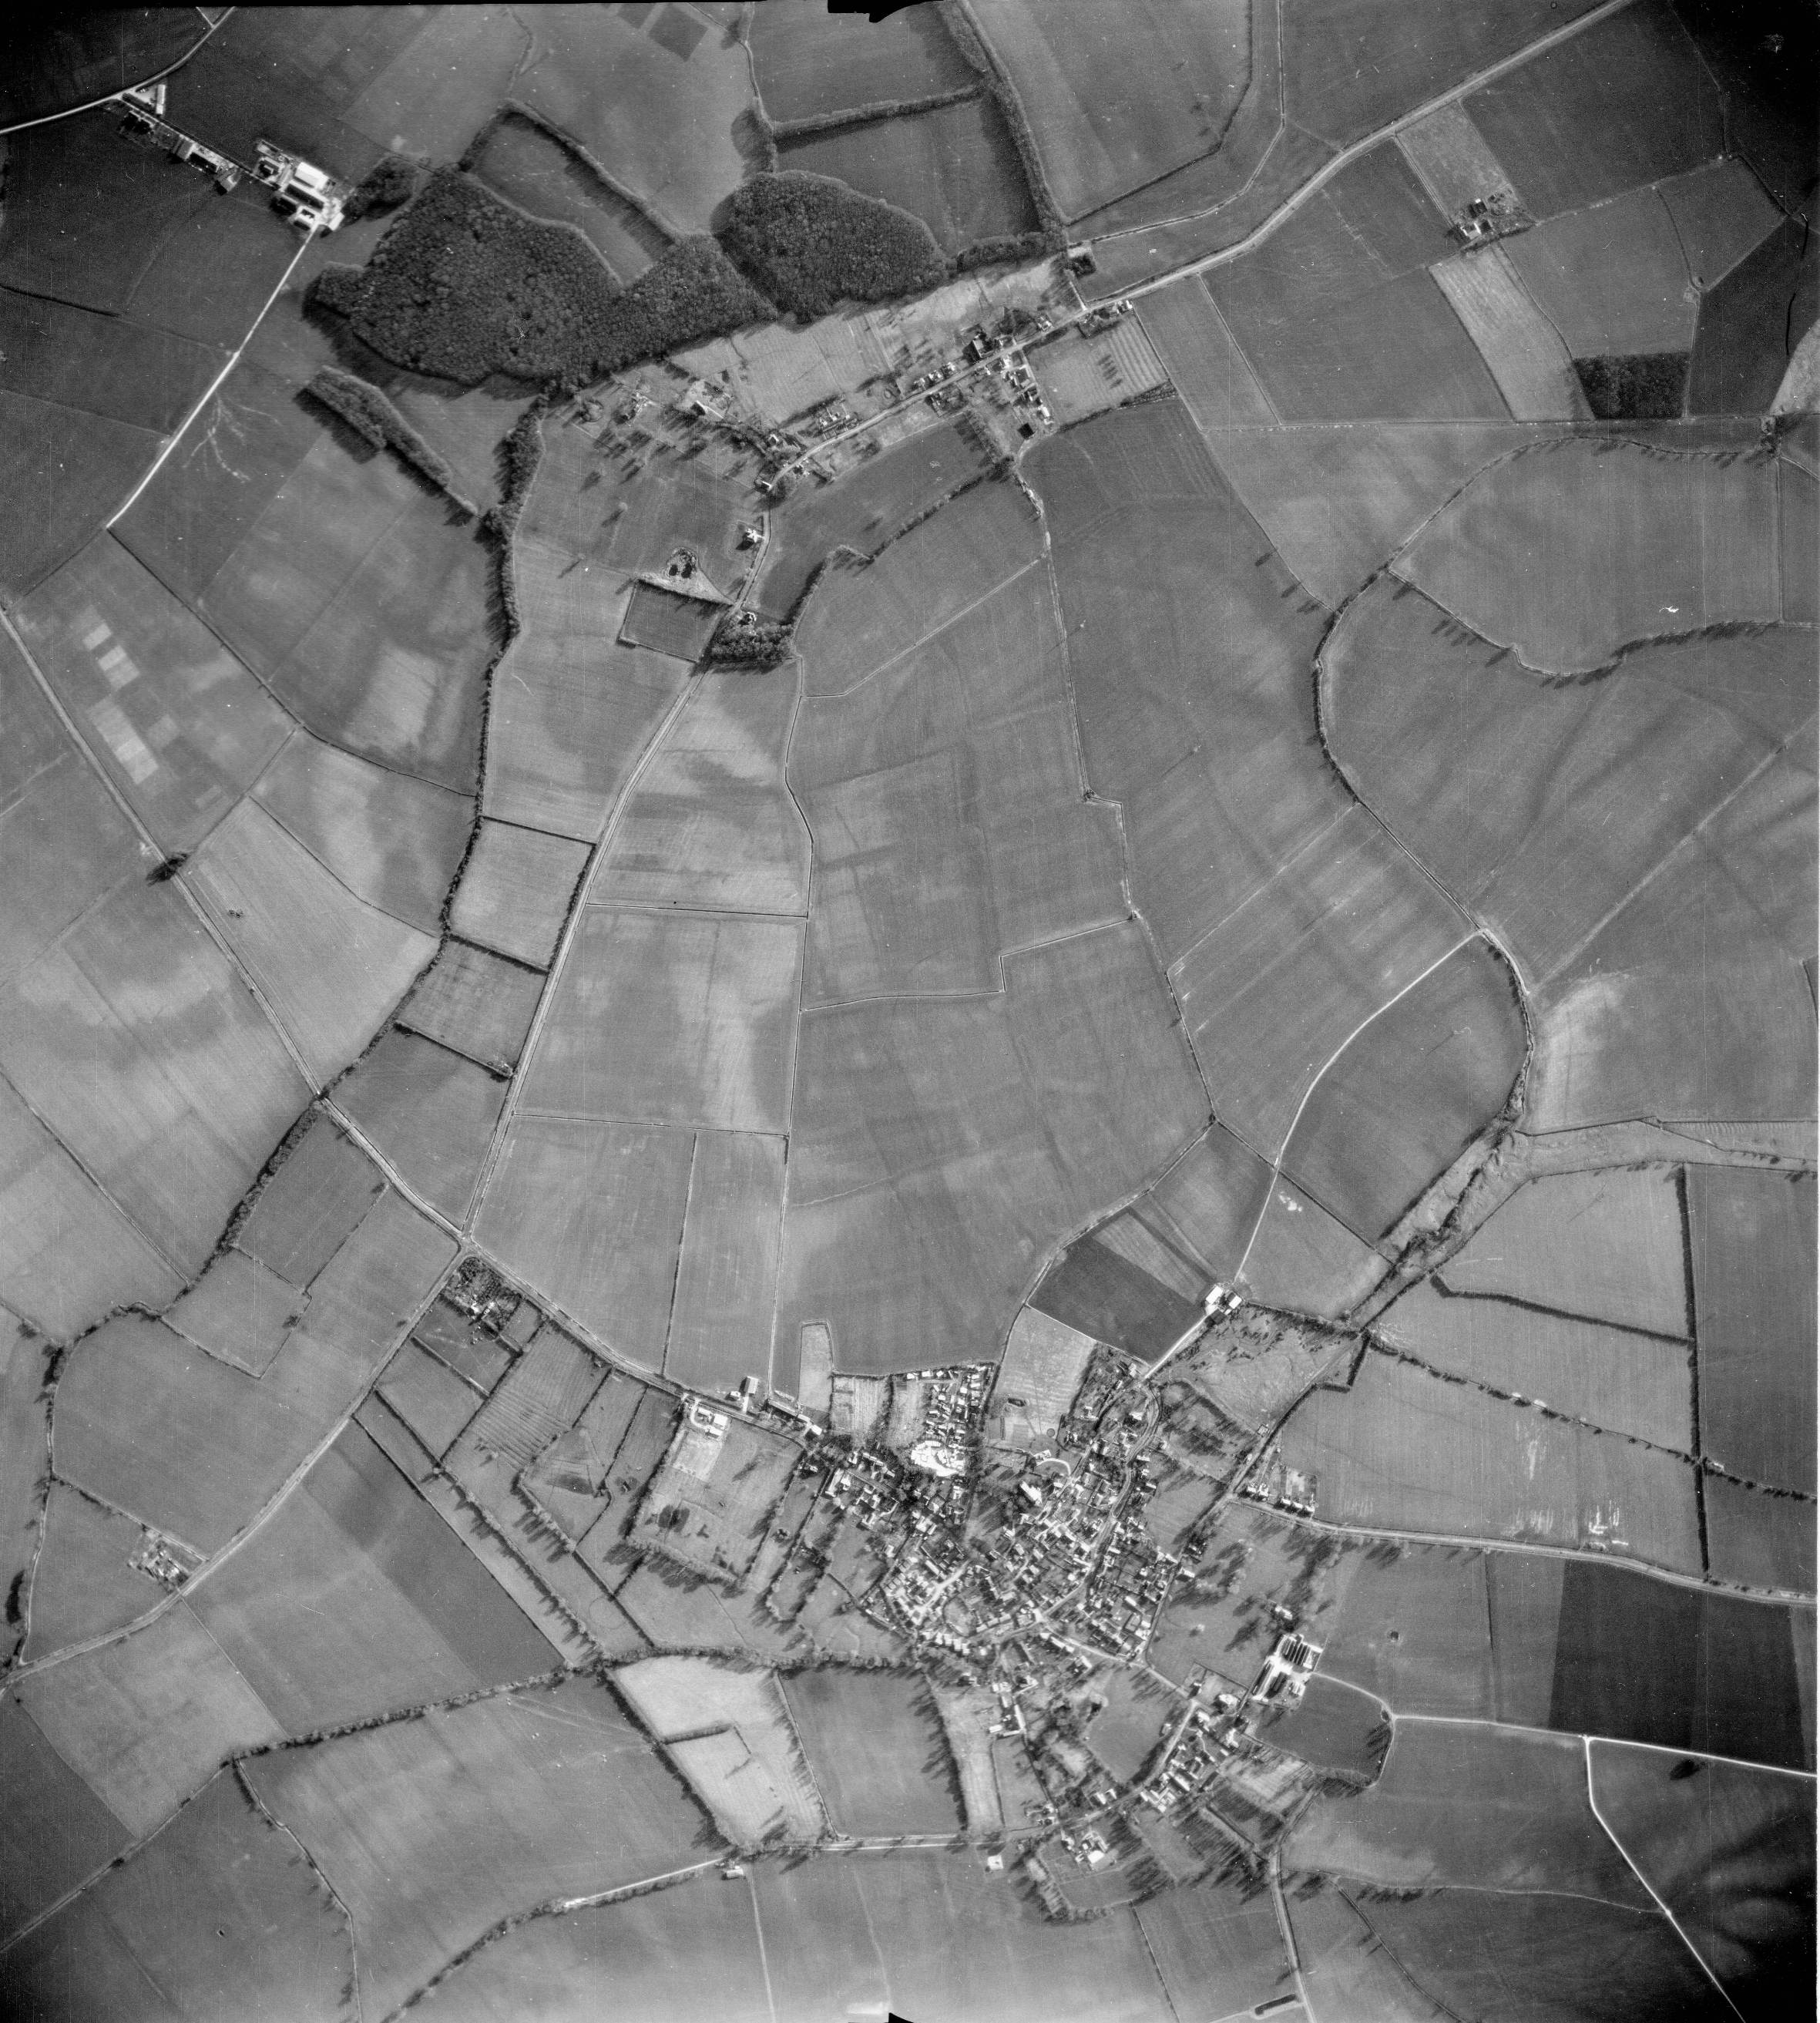 Elsworth and Knapwell in the 1970s